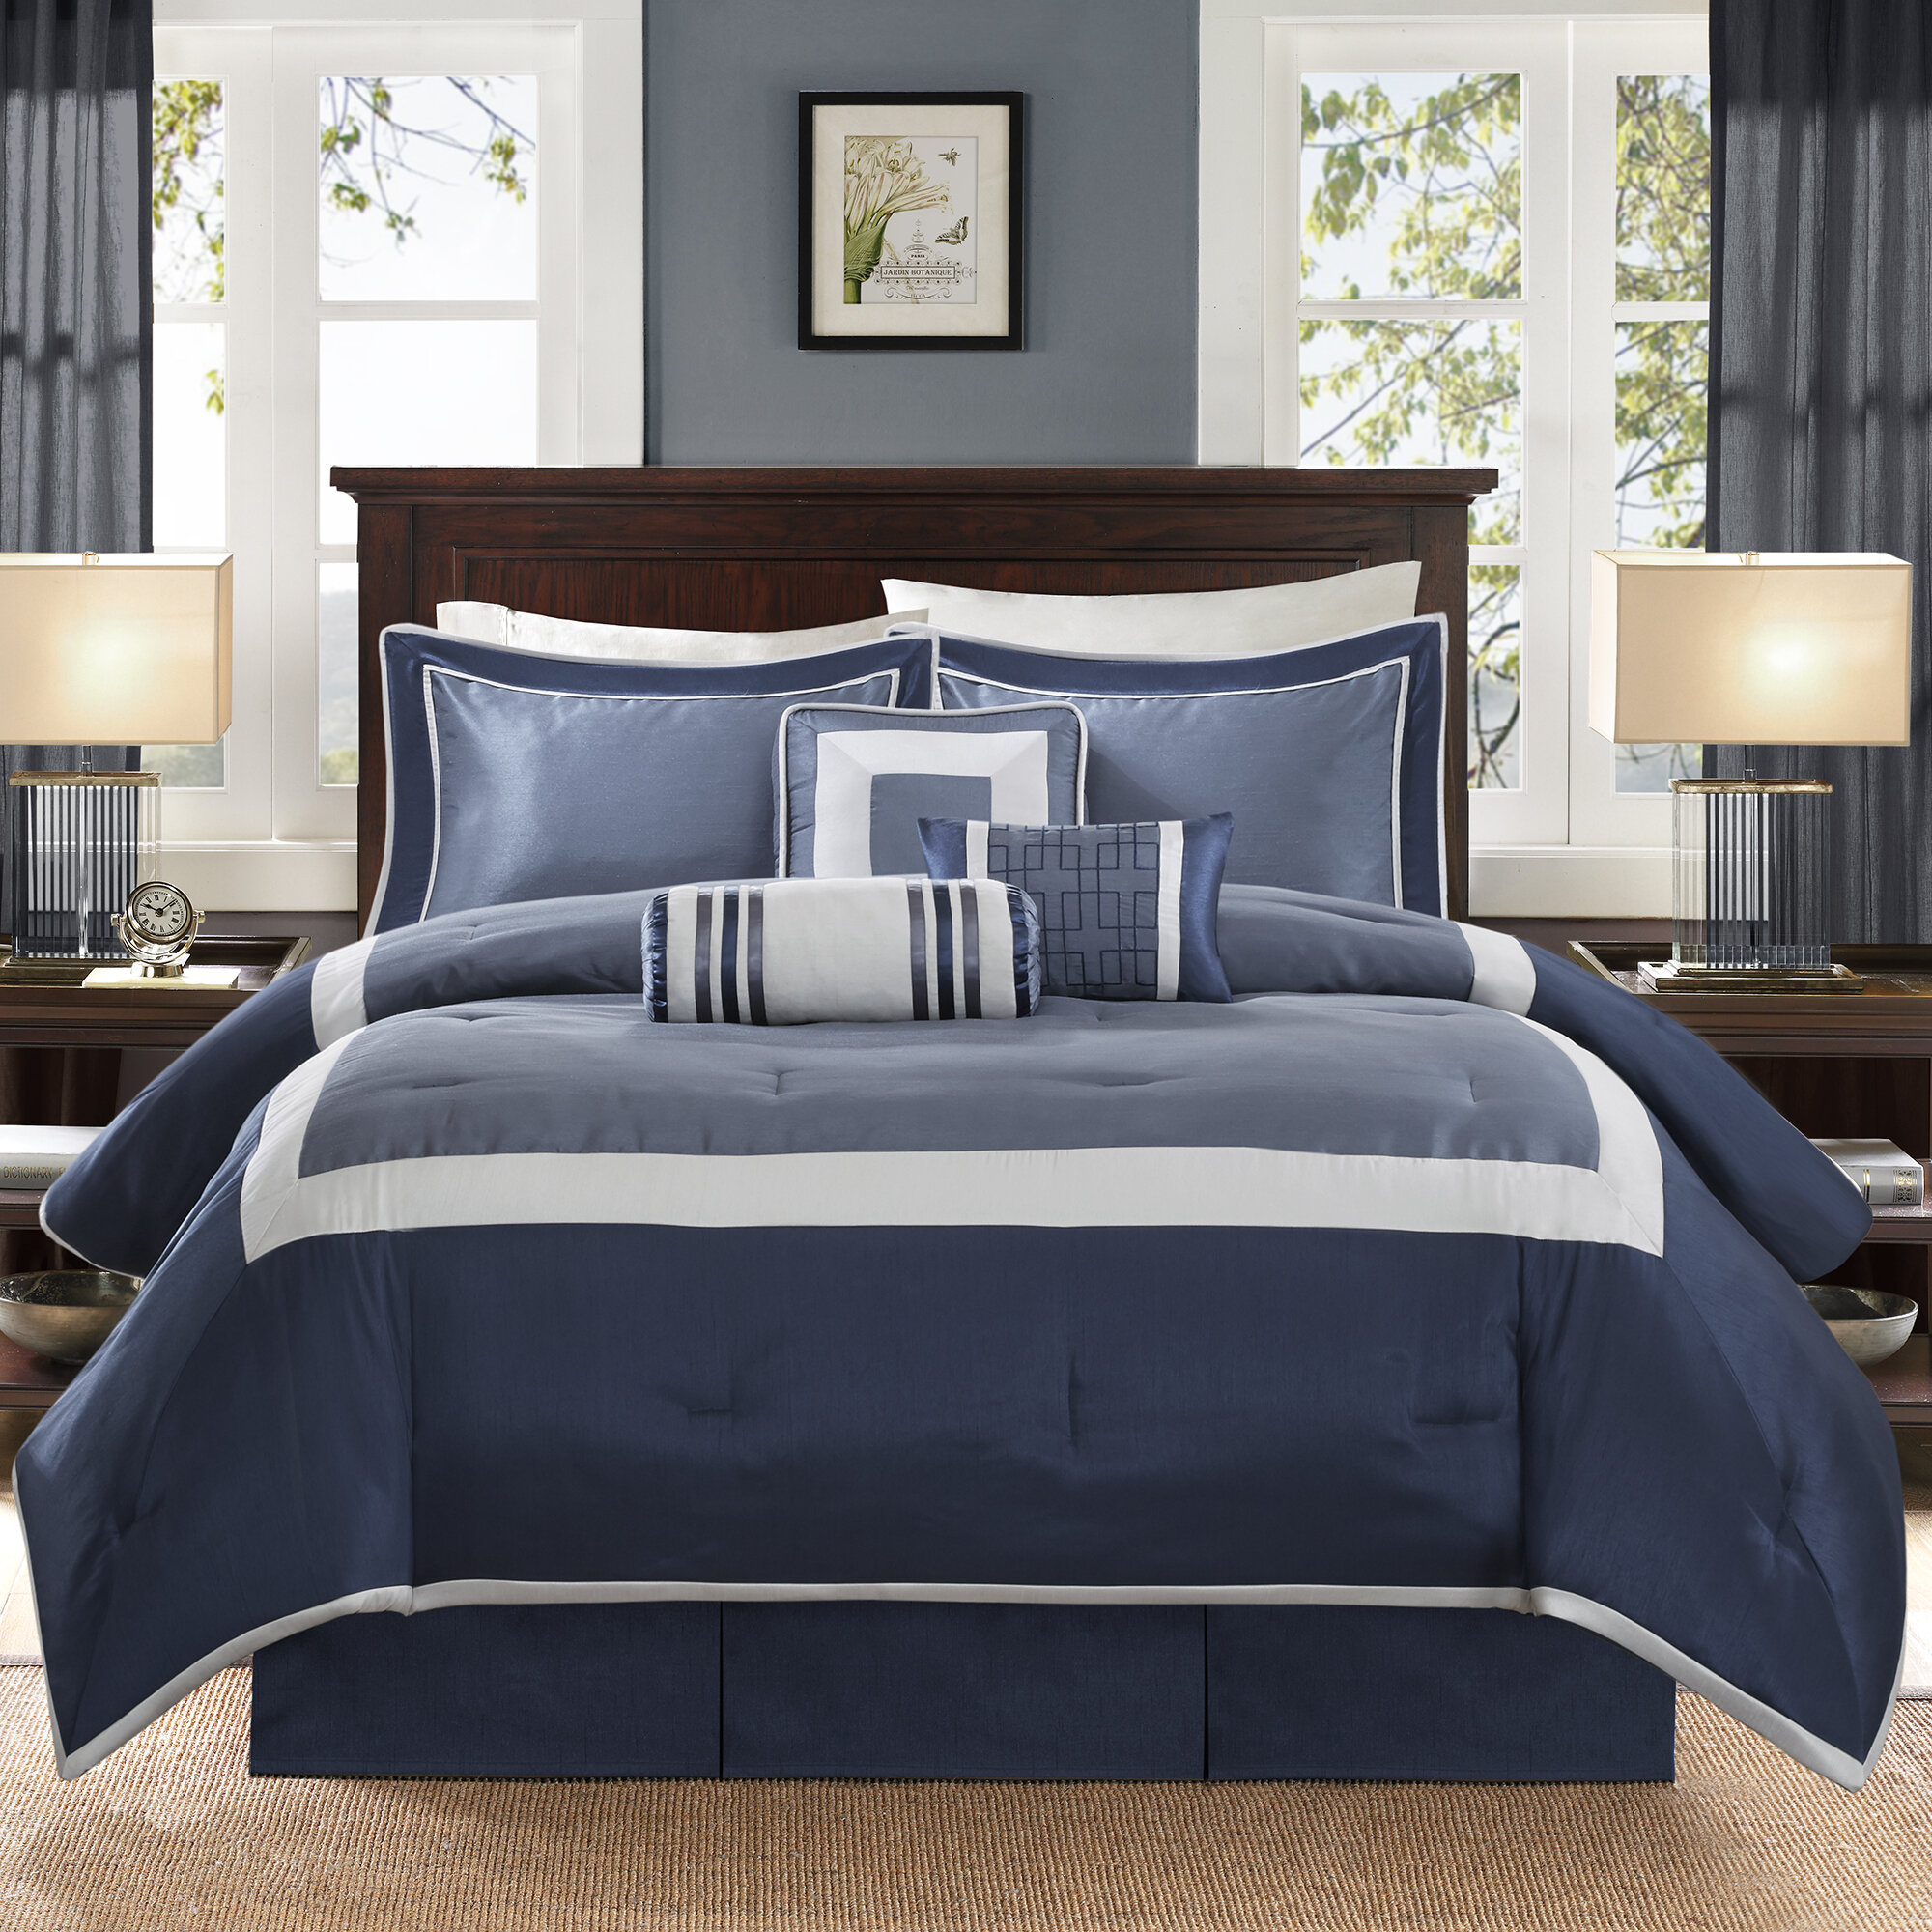 nice comforter sets for queen size bed